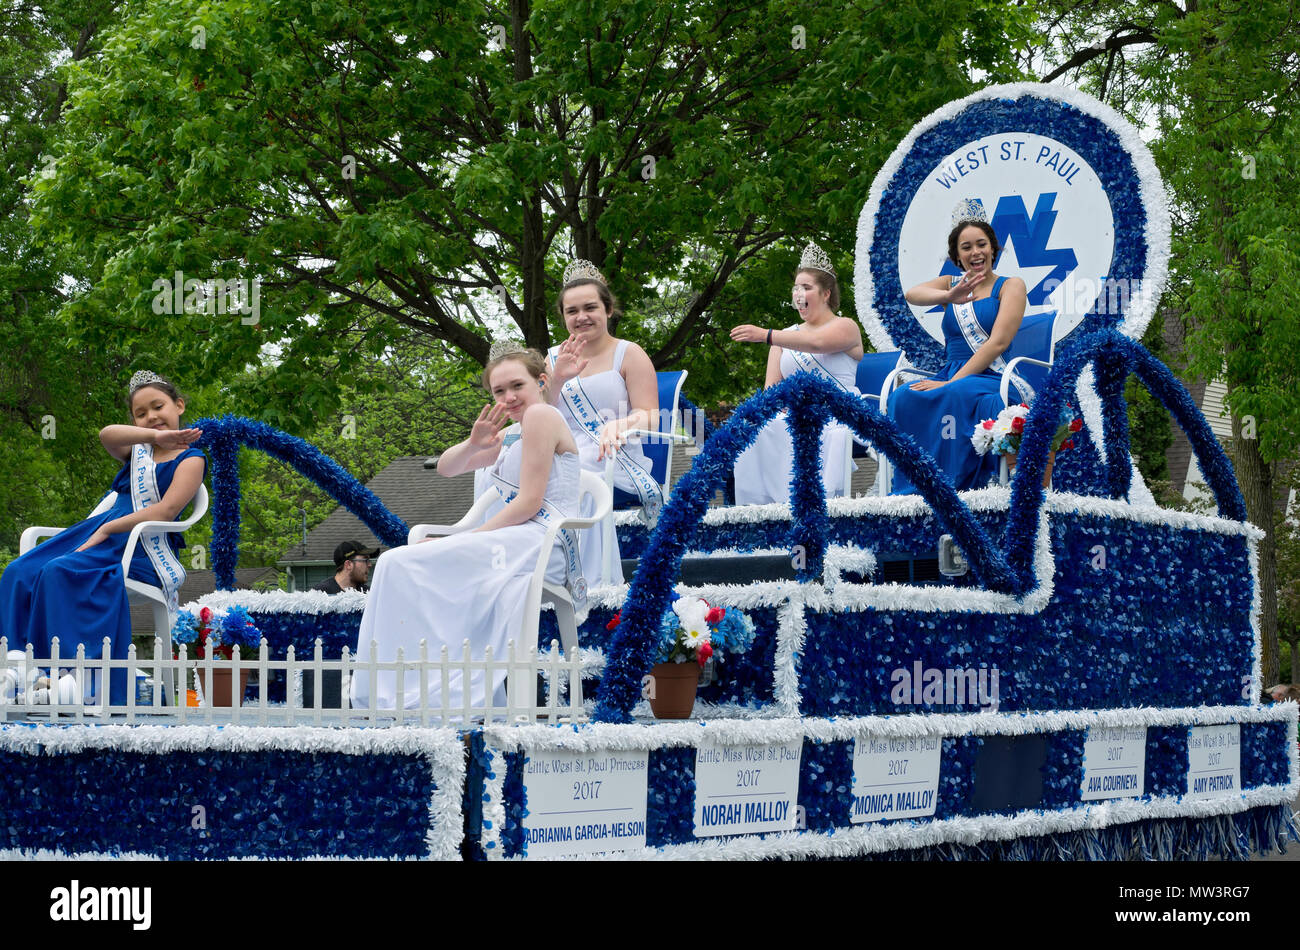 West Saint Paul, Minnesota, USA – MAY 19, 2018: Royalty of West Saint Paul waves to crowd from atop float at annual West Saint Paul Days parade. Stock Photo